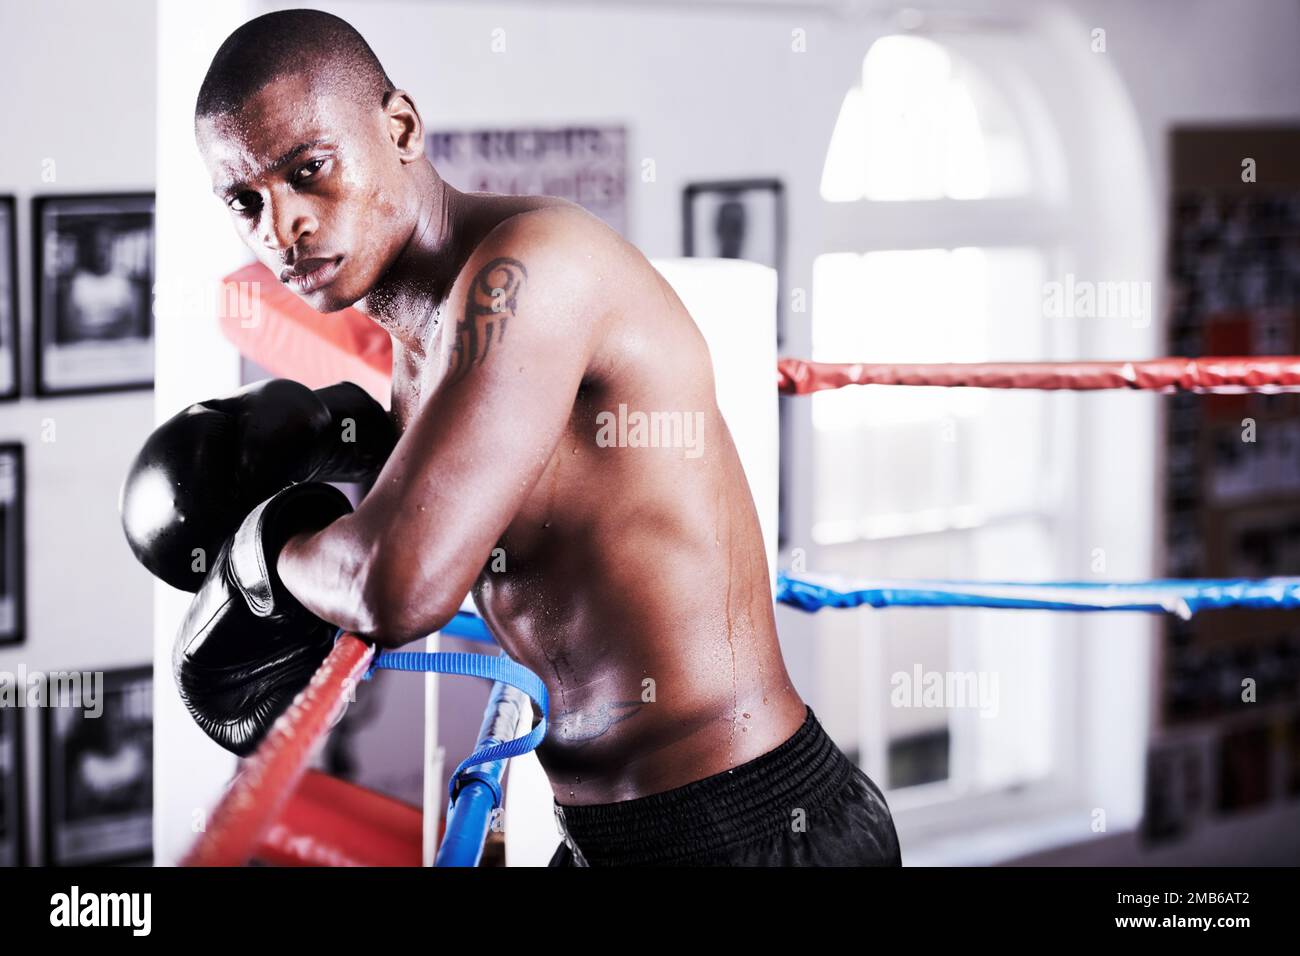 One day the title will be his. A determined boxer leaning on the ropes alongside copyspace. Stock Photo